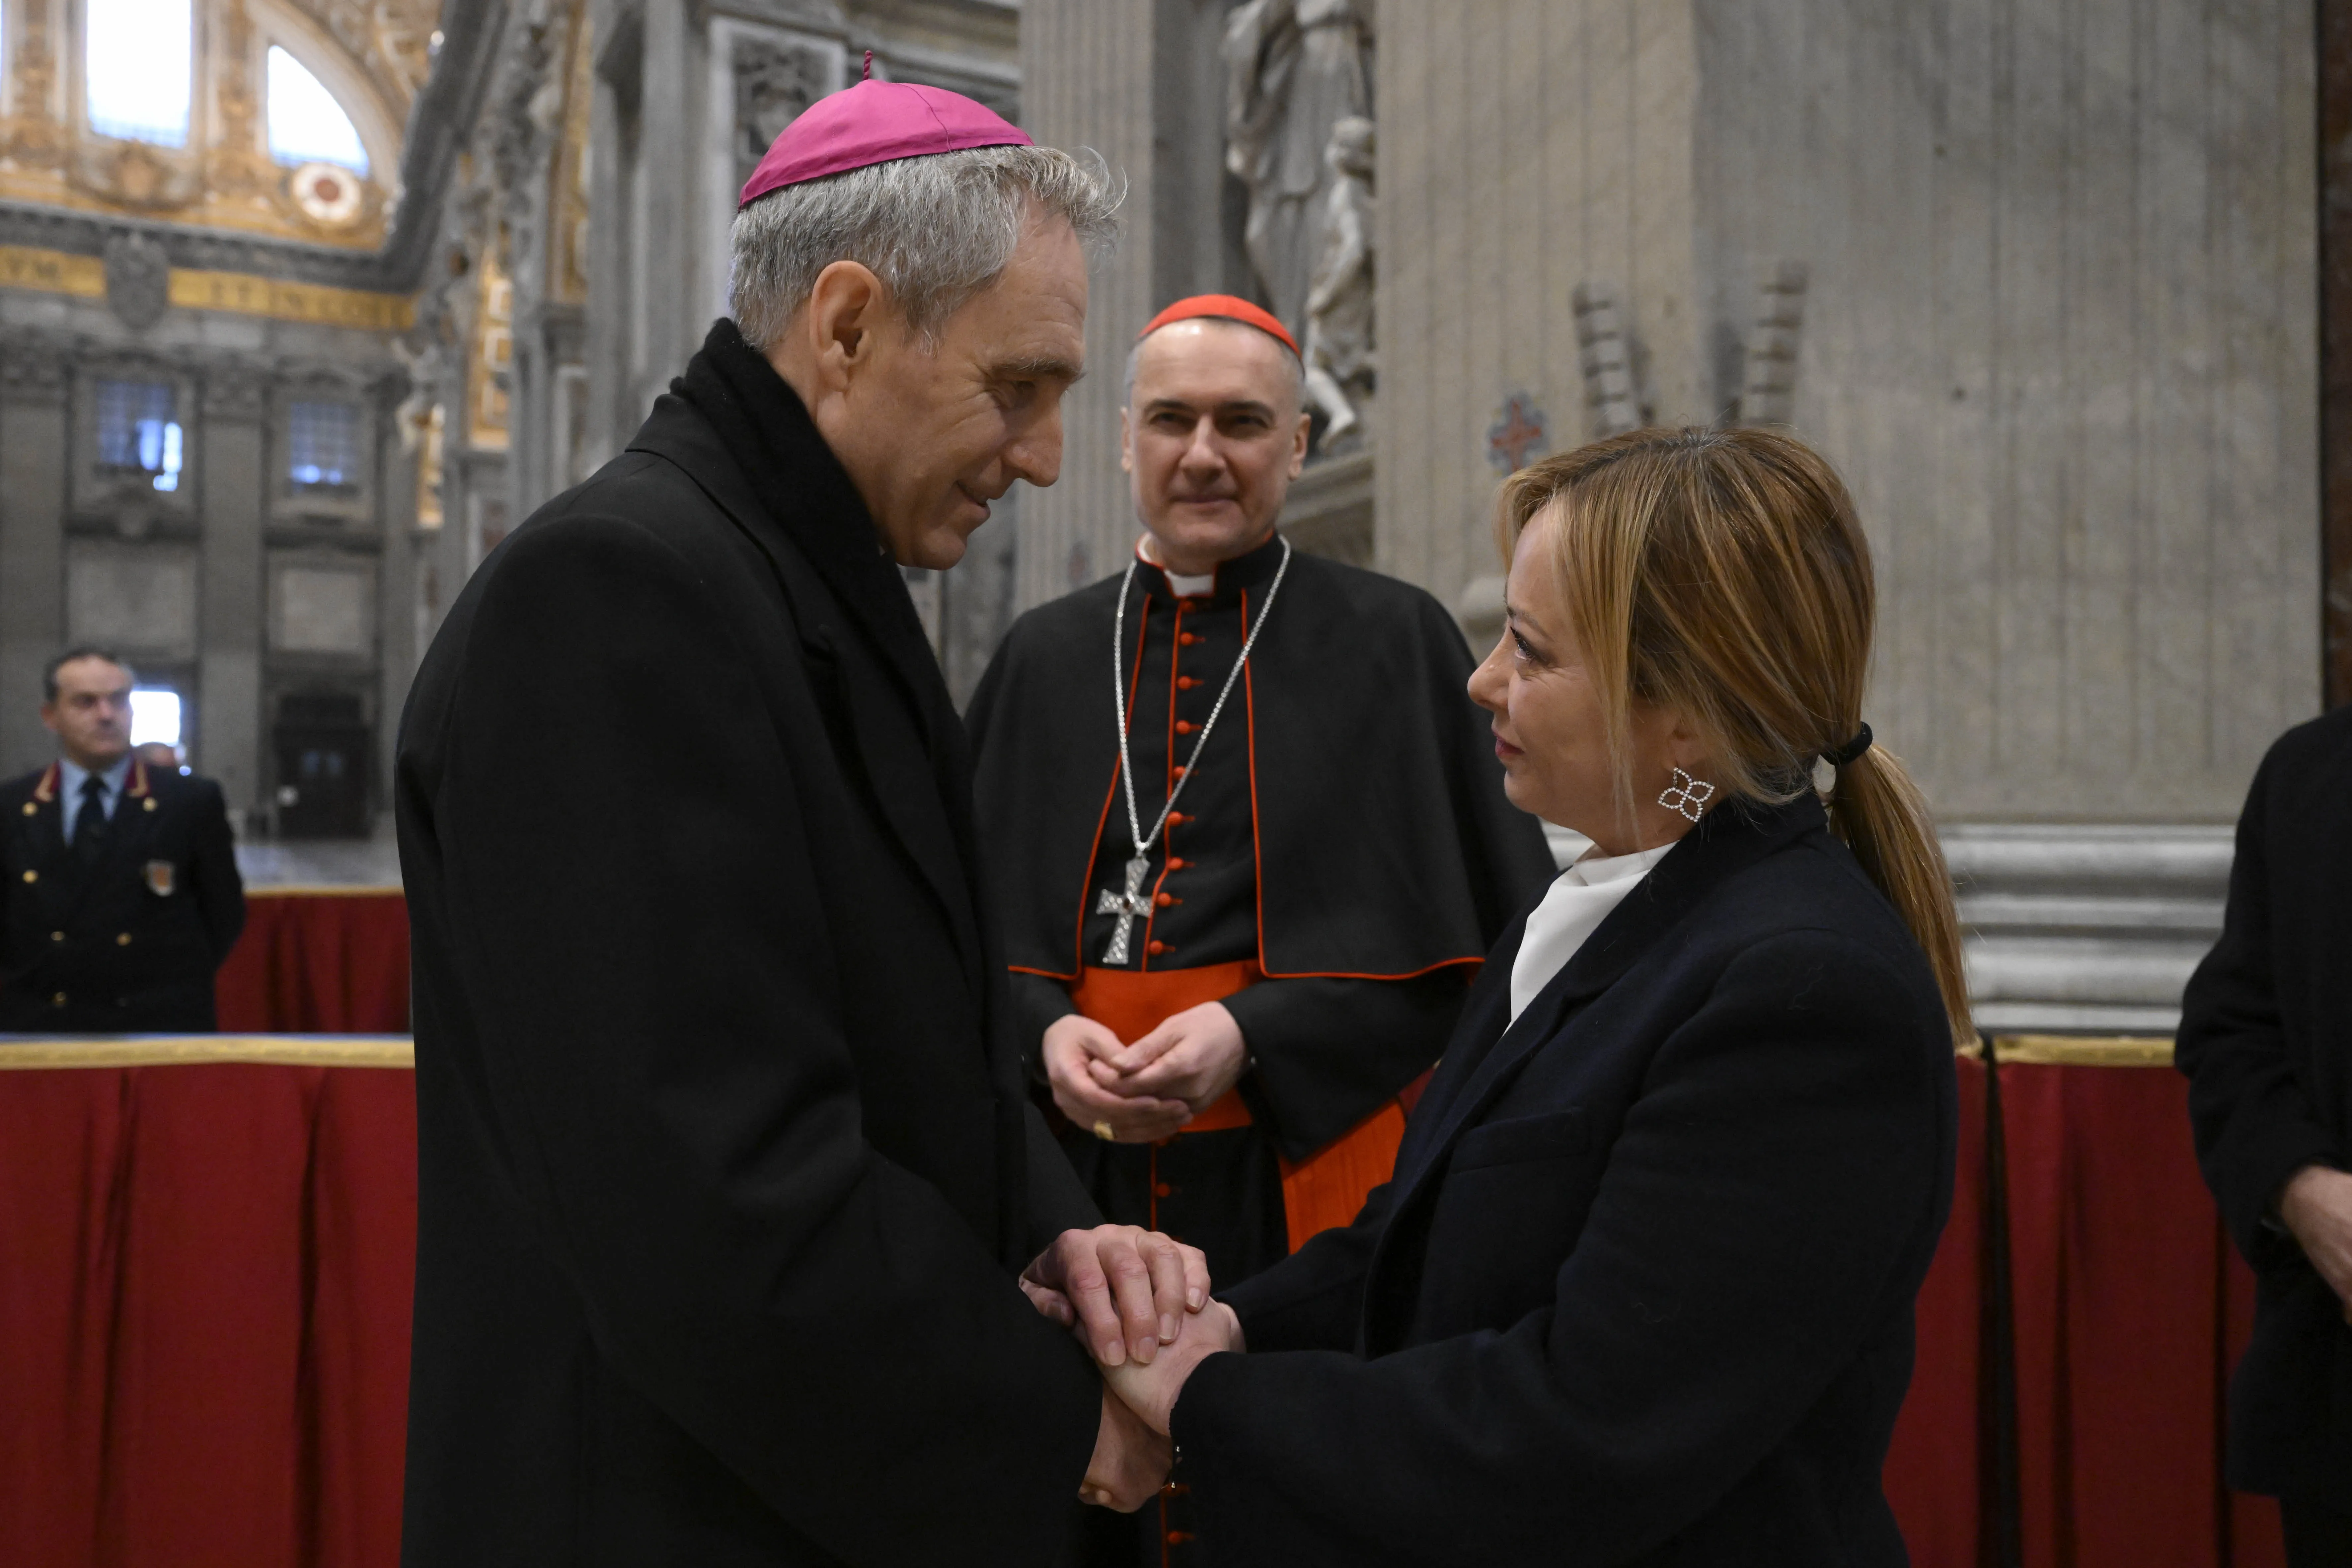 Archbishop Georg Gänswein, the longtime personal secretary of Benedict XVI, greets Italy's Prime Minister, Giorgia Meloni, on Jan. 2, 2023, at St. Peter's Basilica, where Benedict is lying in state.?w=200&h=150